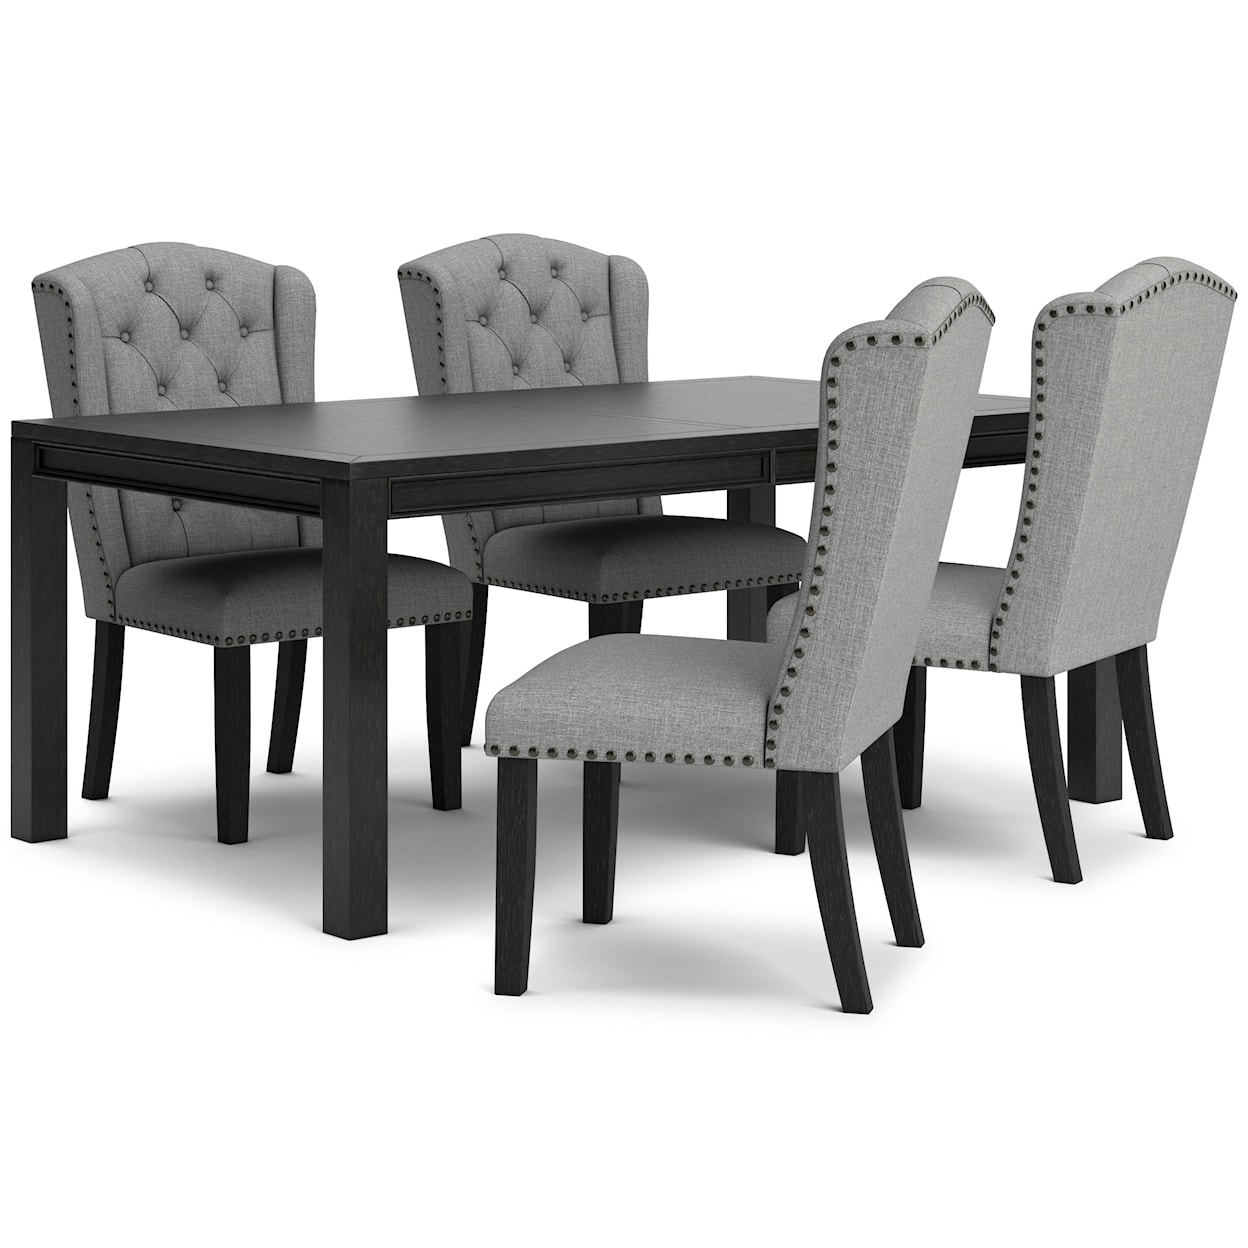 Benchcraft Jeanette 5-Piece Dining Set